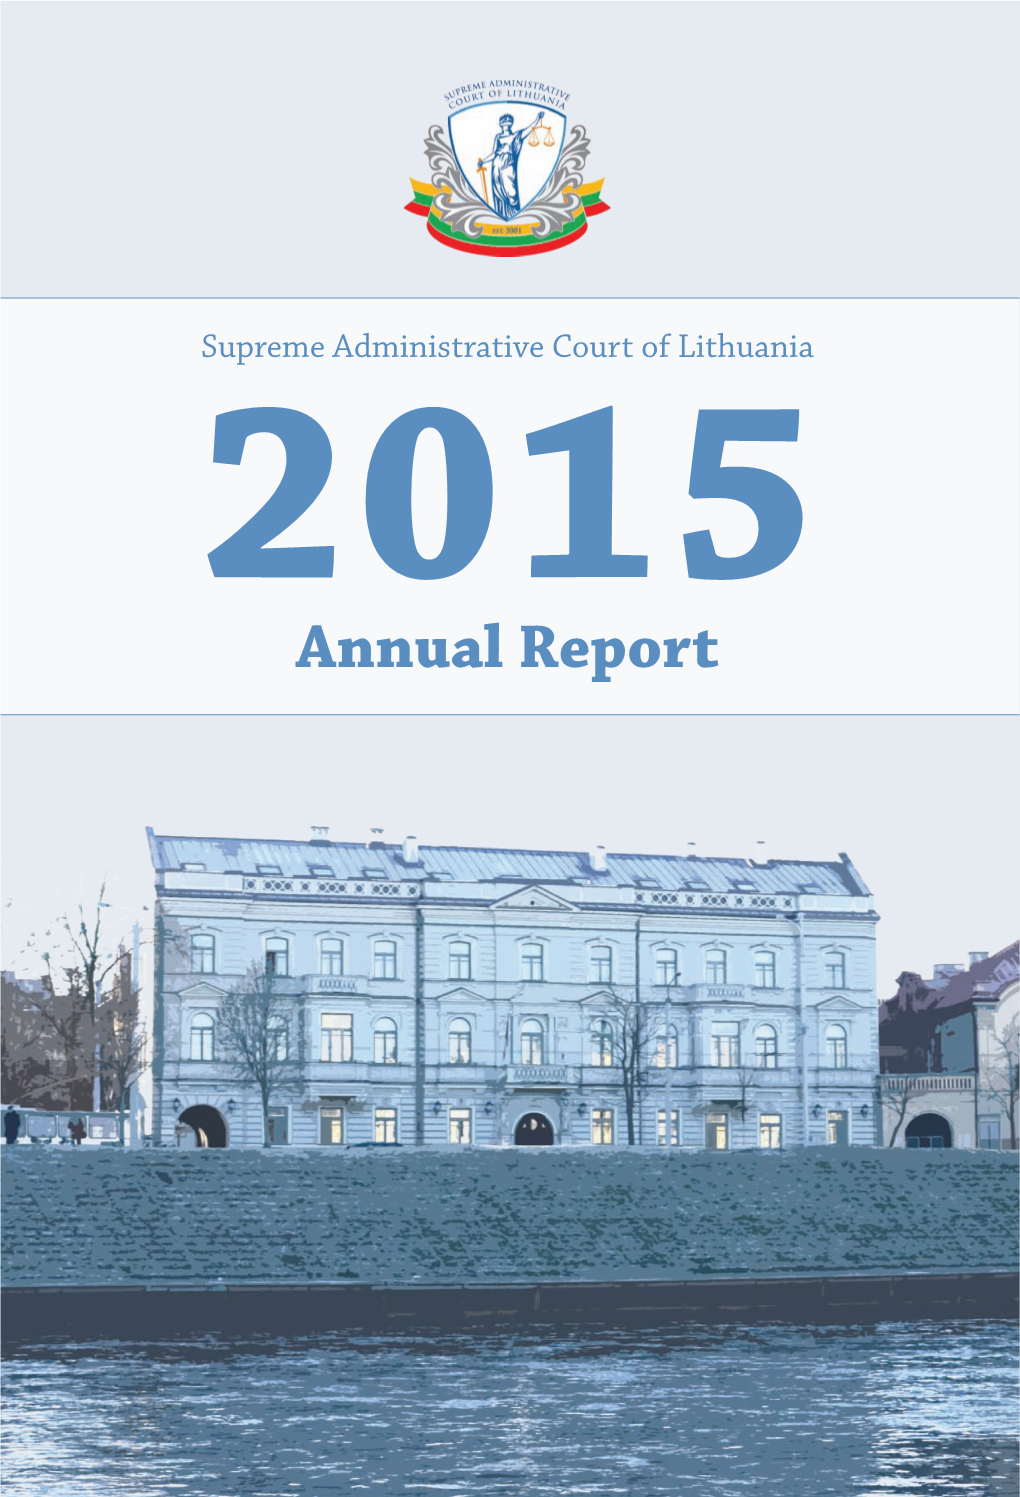 Annual Report 2015 3 15Th Anniversary of The